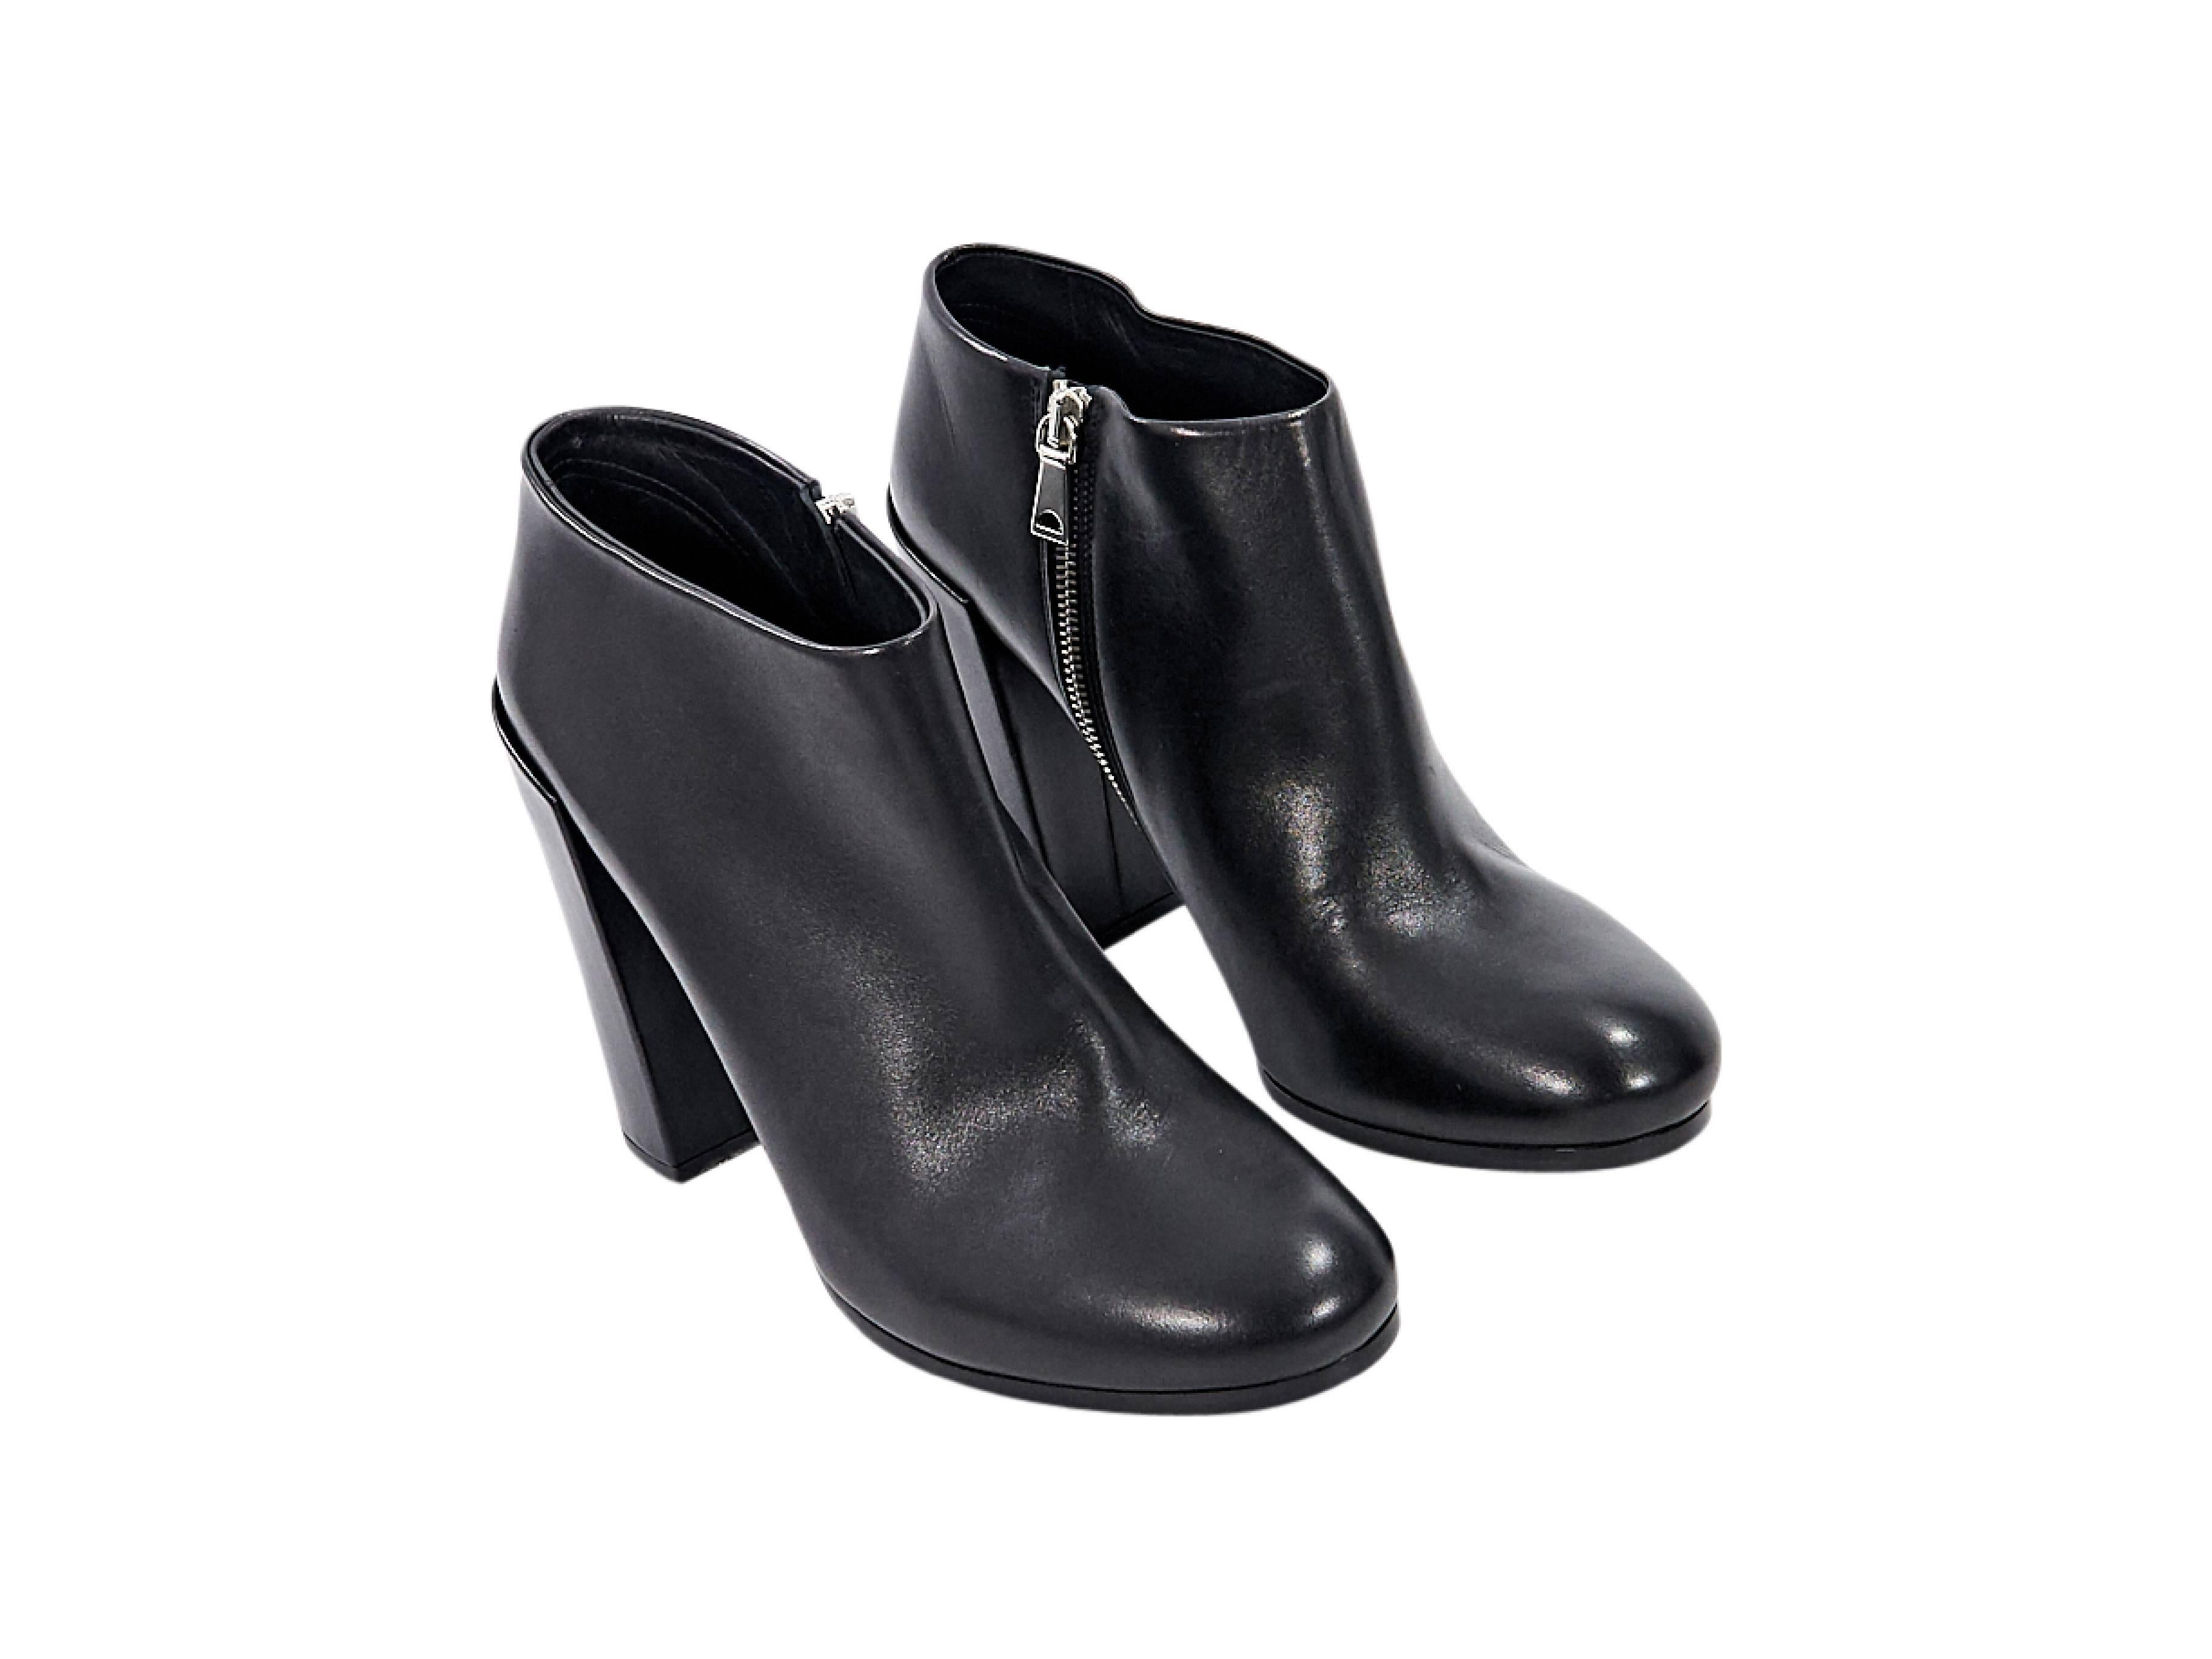 Product details: Black leather ankle boots by Proenza Schouler. Round toe. Block heel. Inner zip closure. 
Condition: Pre-owned. Very good.
Est. Retail: $ 1,495.00